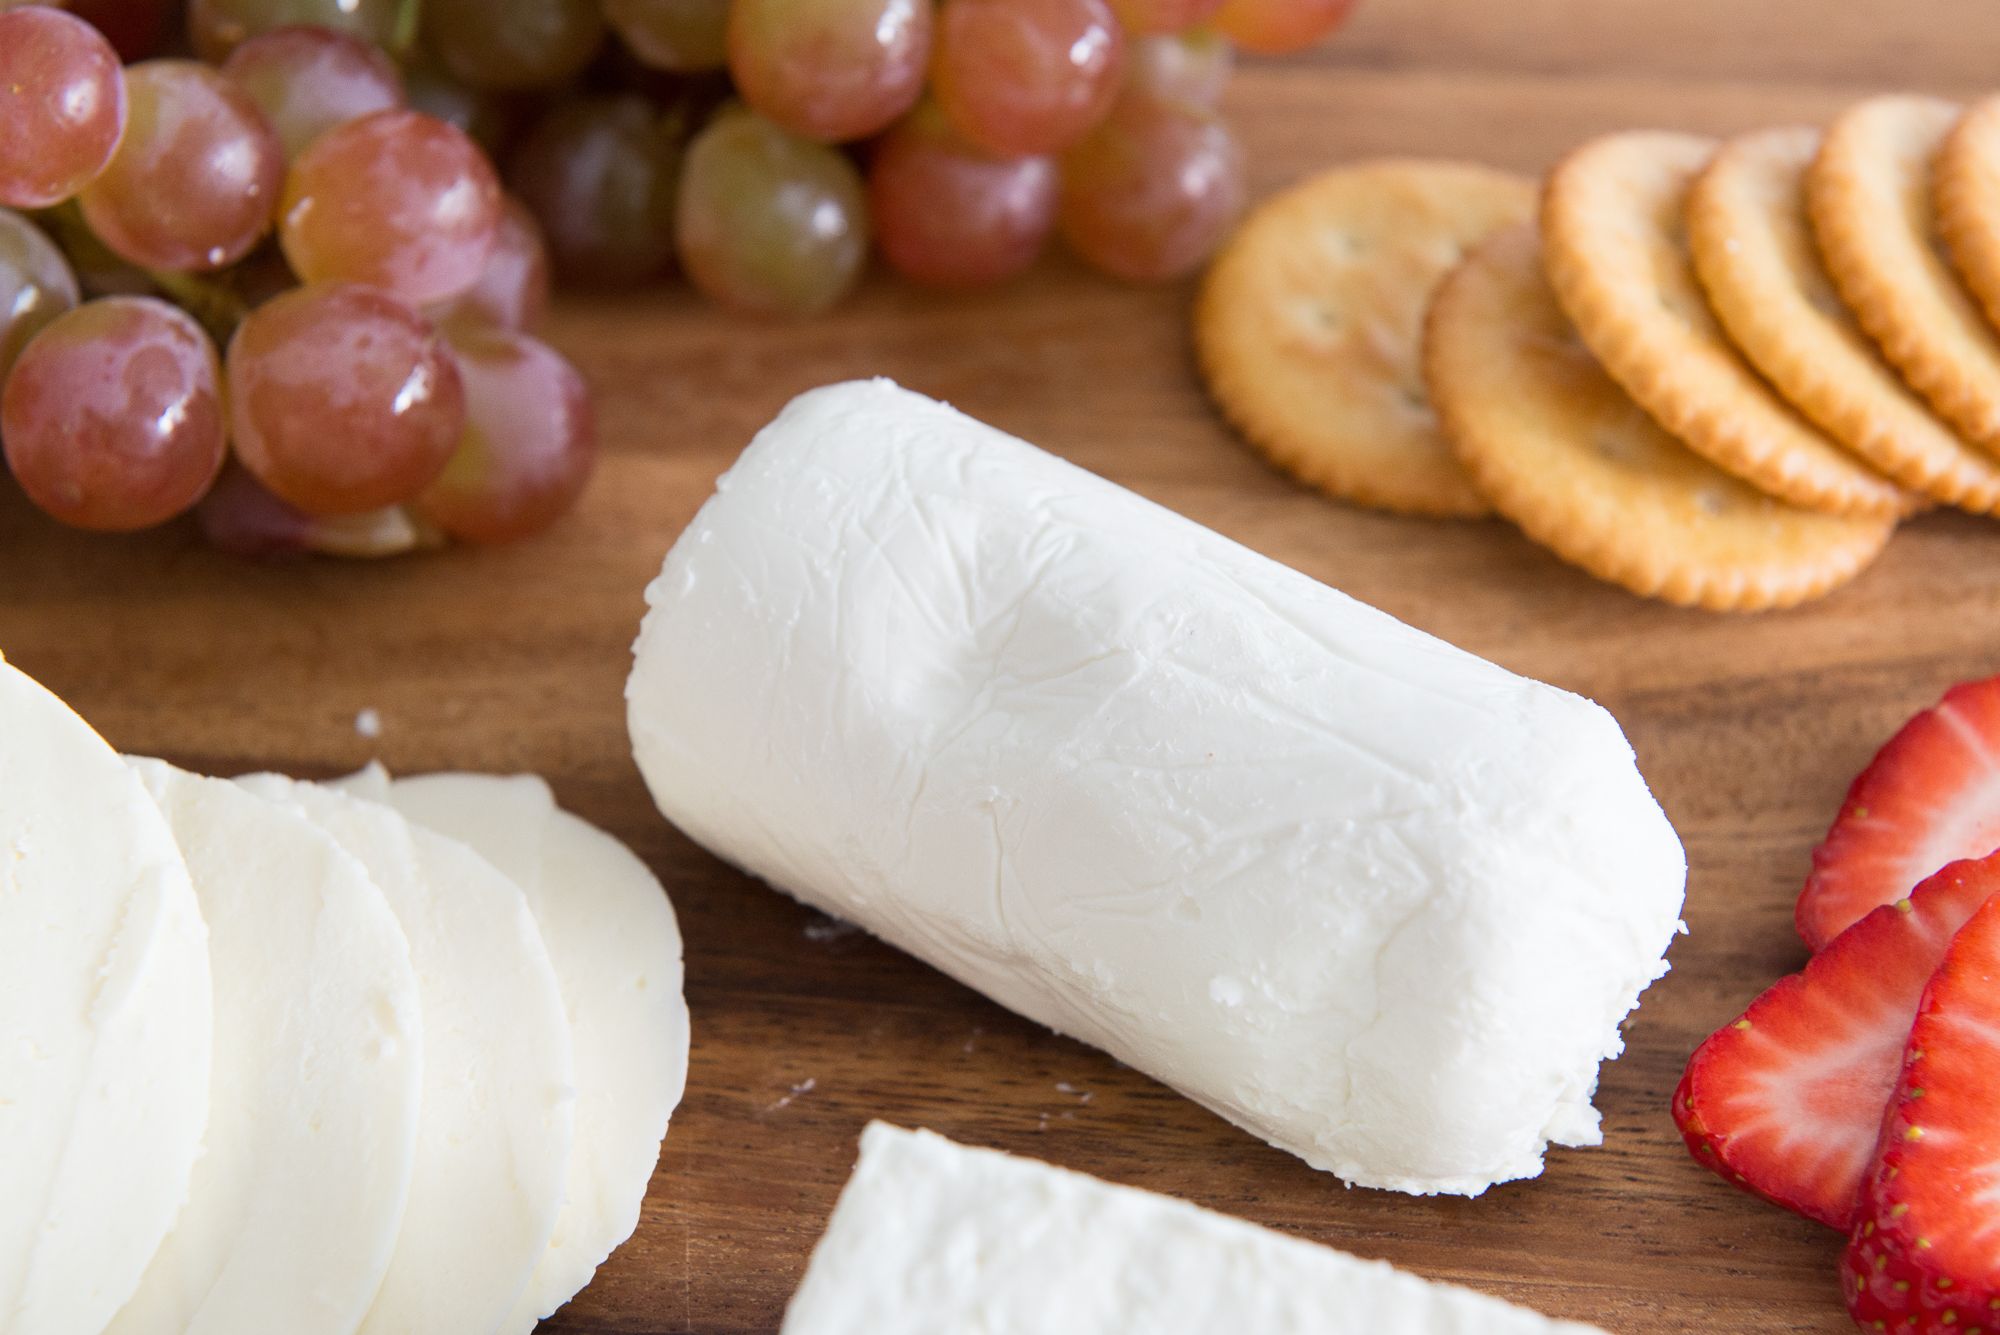 What to Know About Storing Cheese